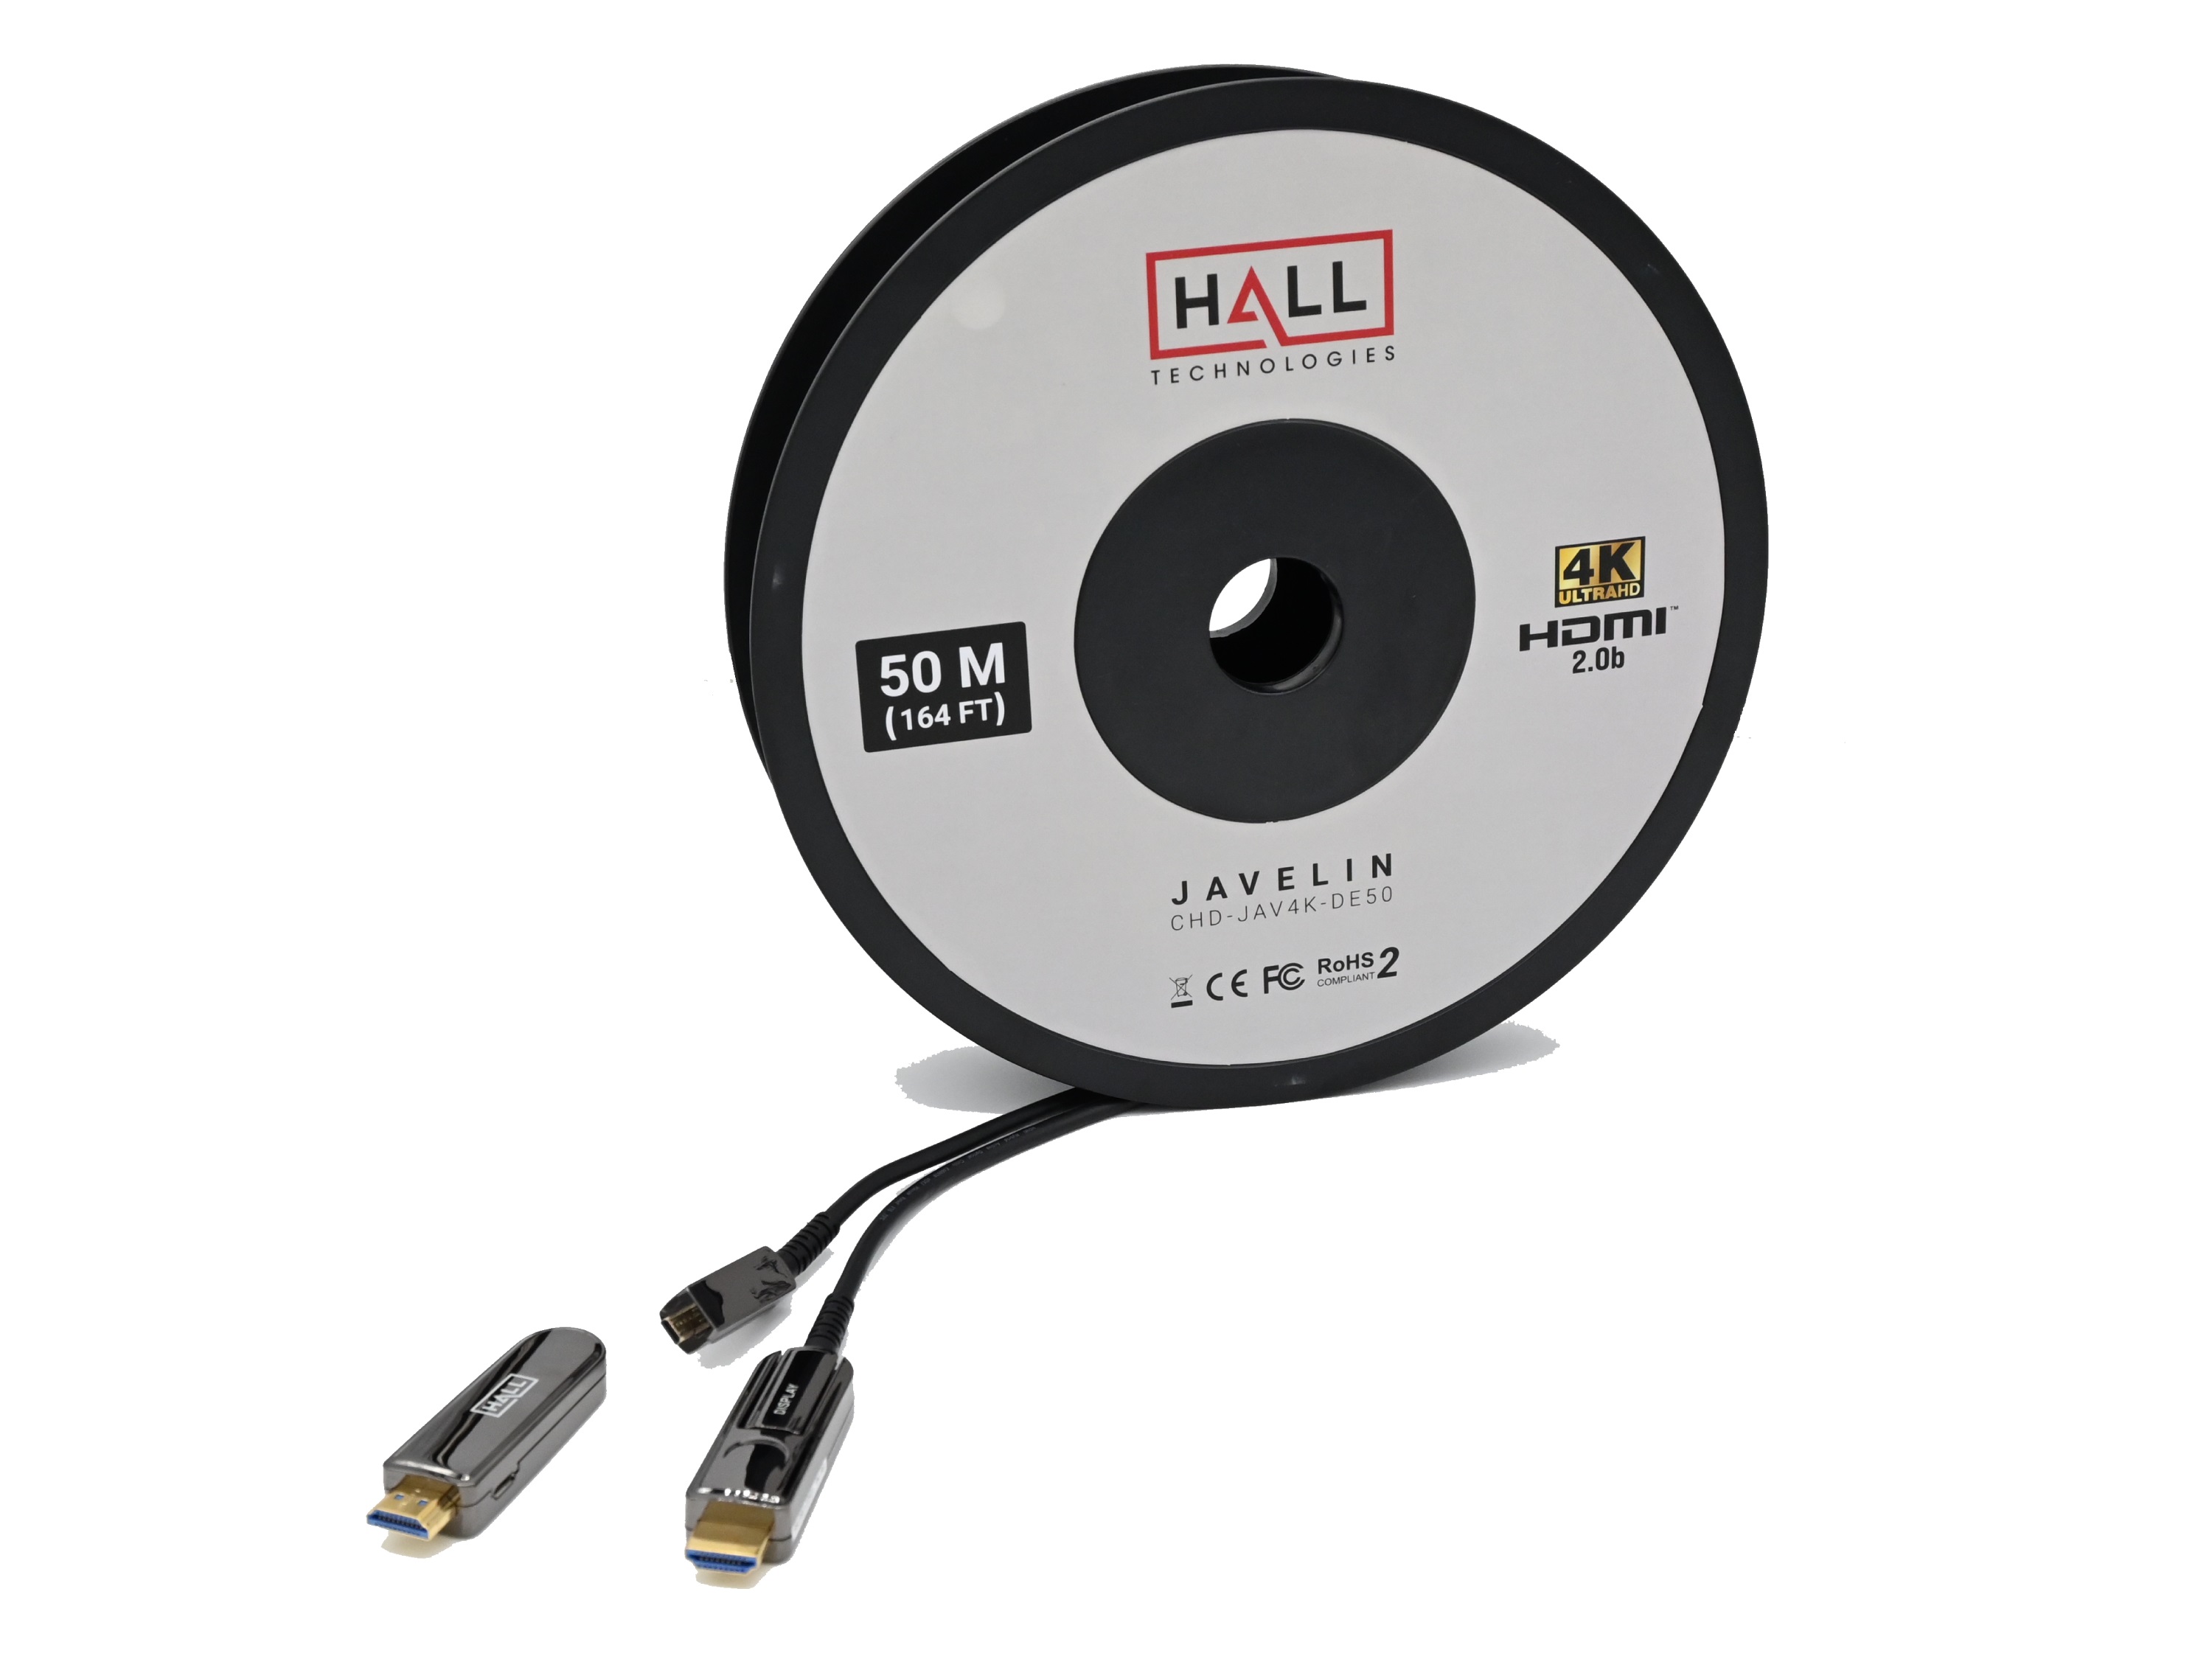 CHD-JAV4K-DE30 30m/100ft 18 Gbps 4K Javelin Active Plenum HDMI Cable with Detachable Ends by Hall Technologies